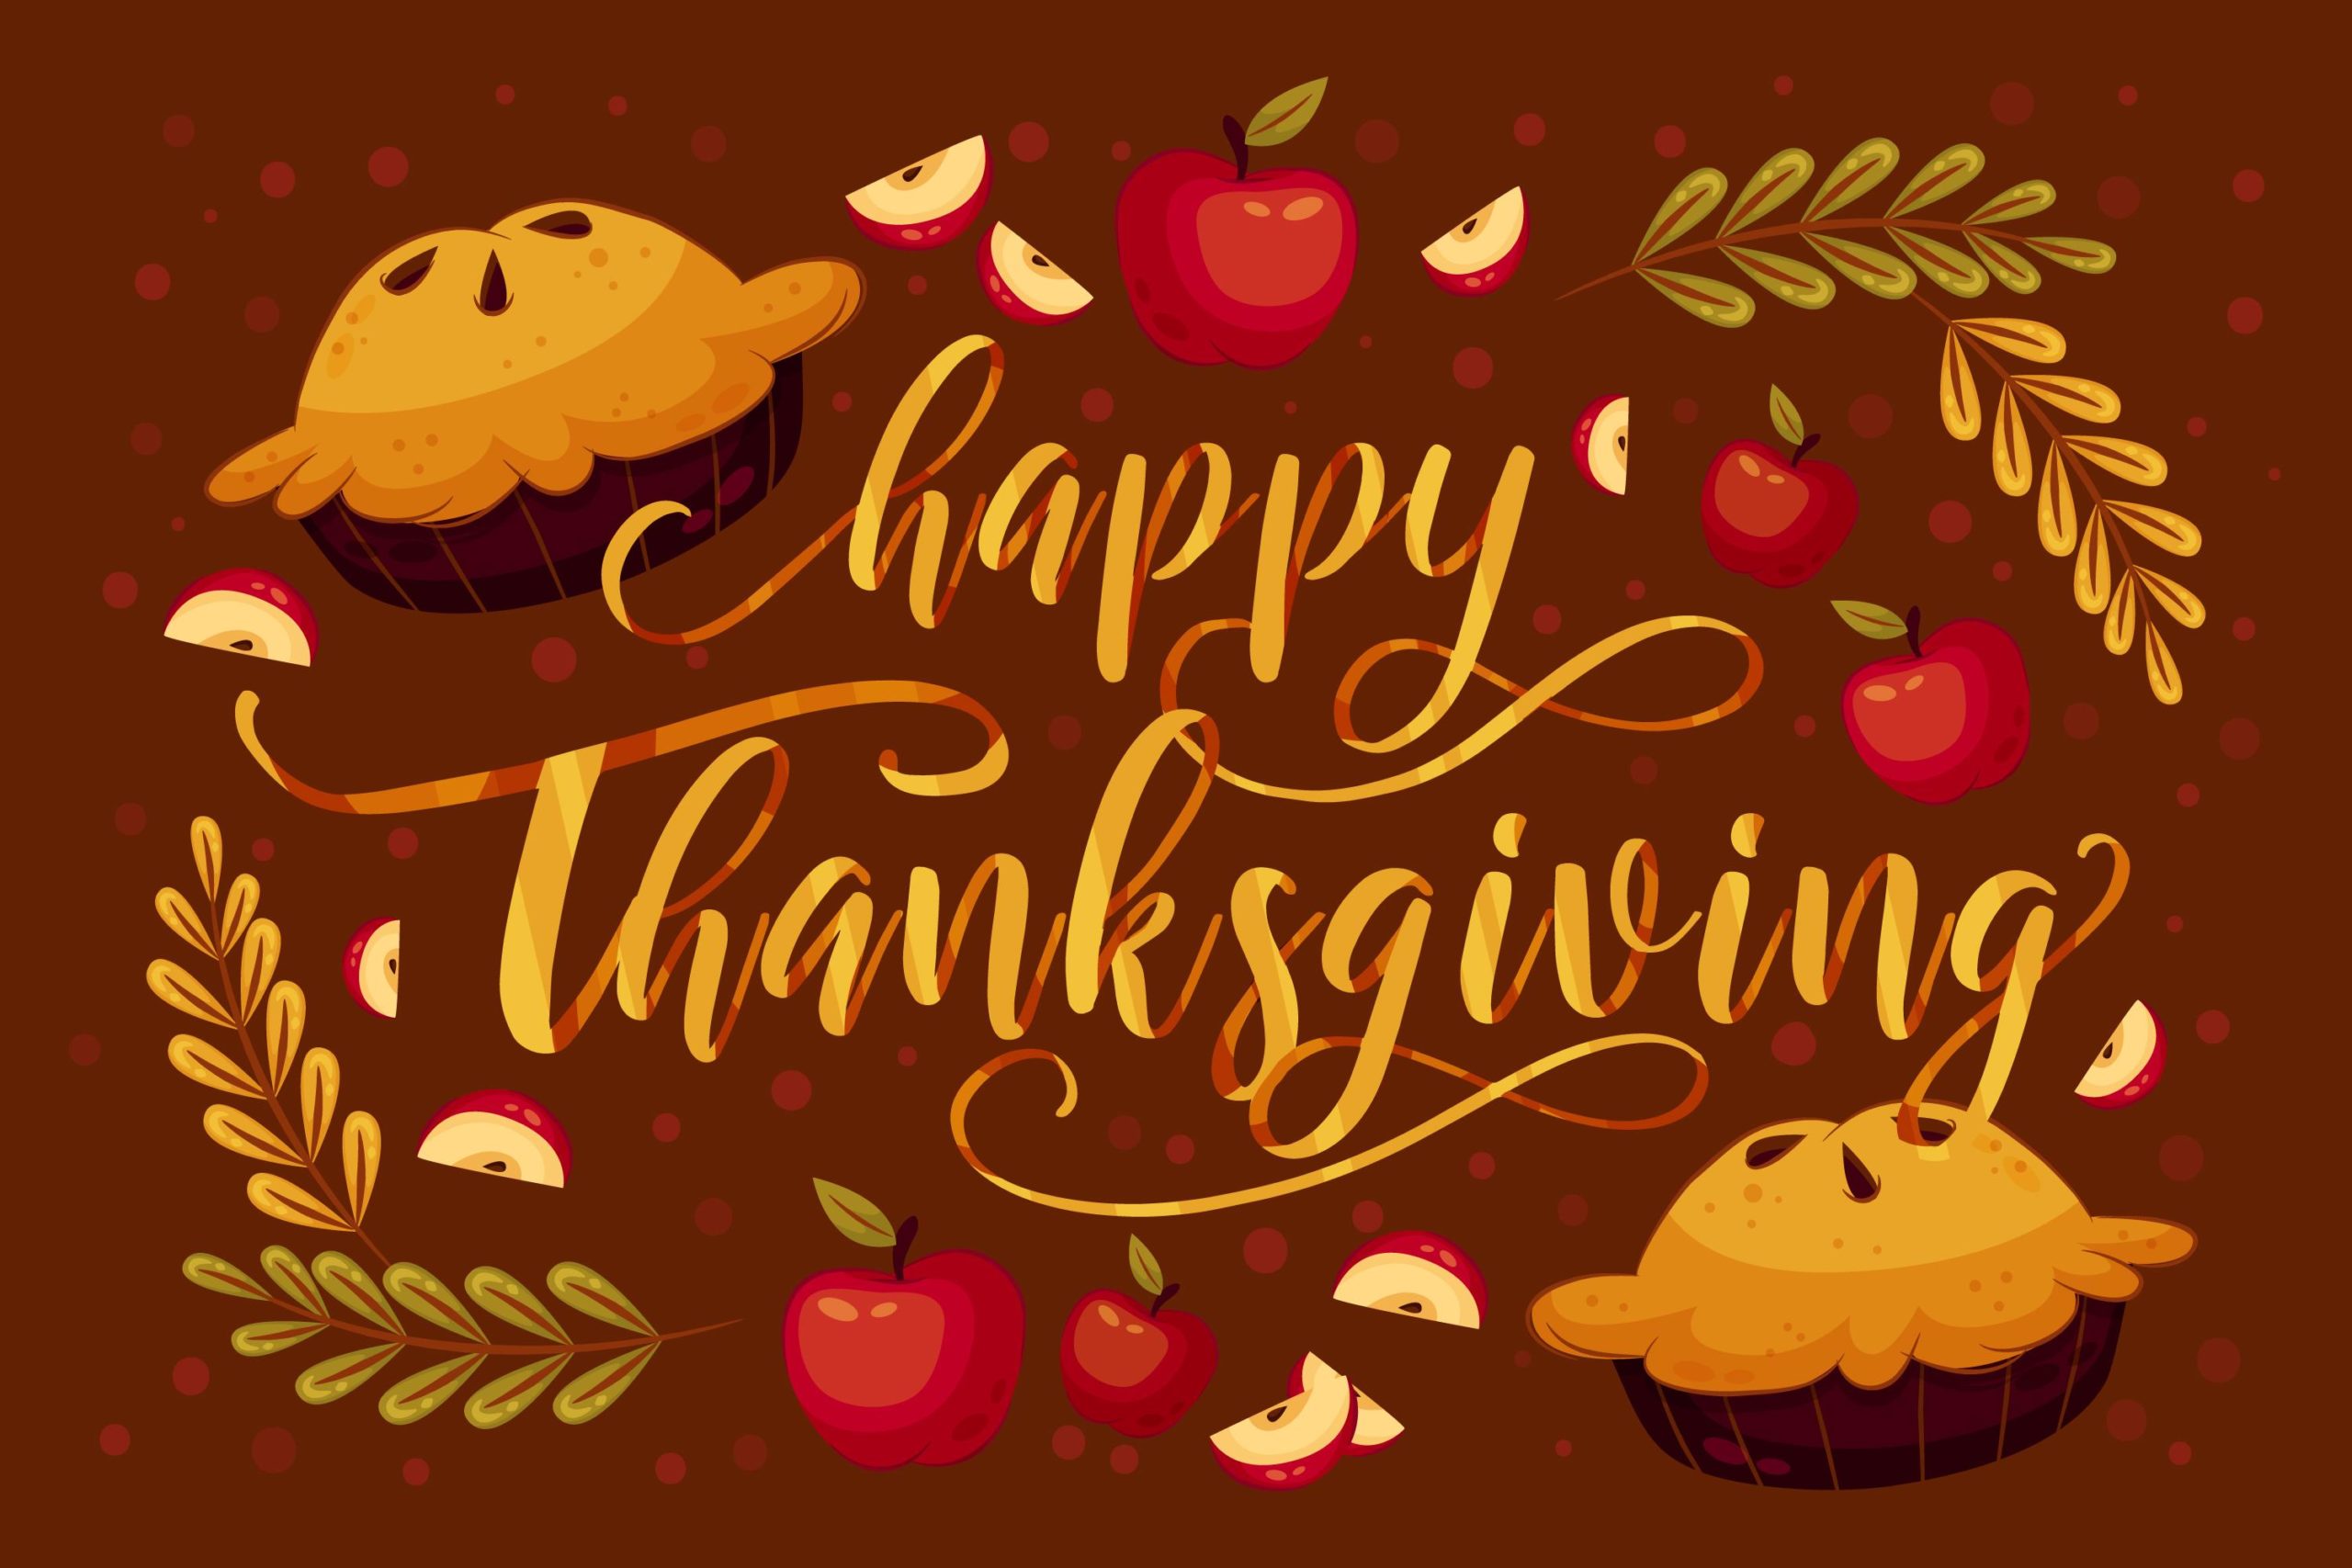 Happy Thanksgiving Day 2022: Greet your Colleagues using these best Wishes, Messages, HD Images, Greetings, Posters, Sayings, Jokes, and Memes